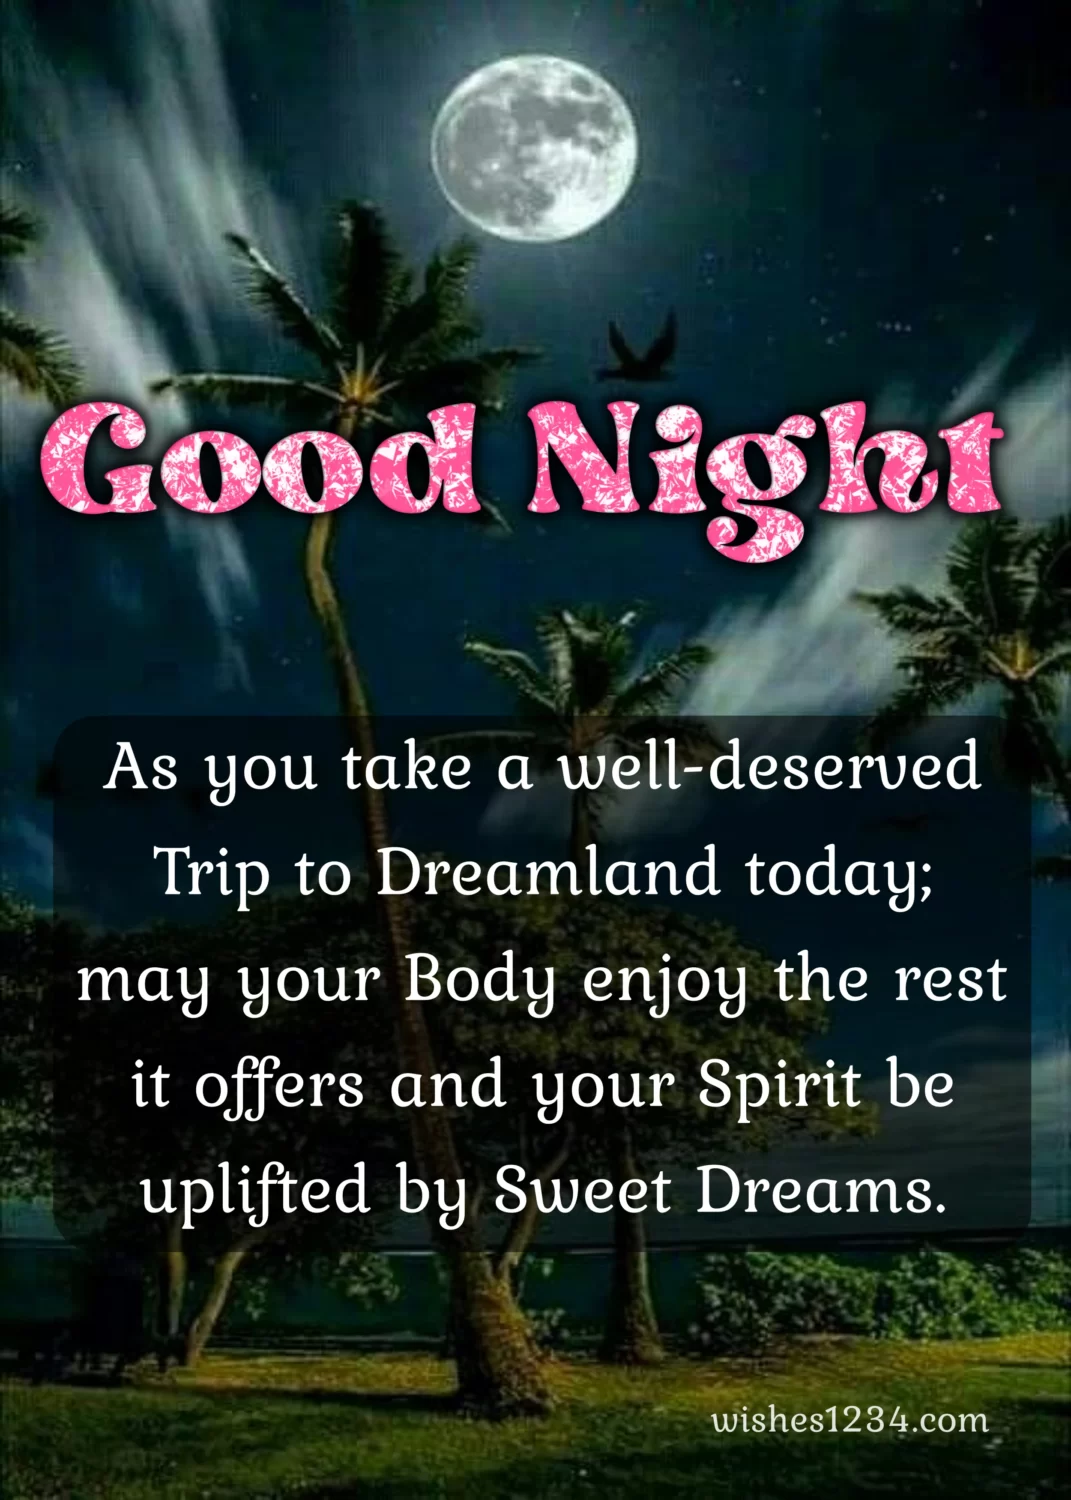 Good night quote with coconut tree in background, Good Night Messages.